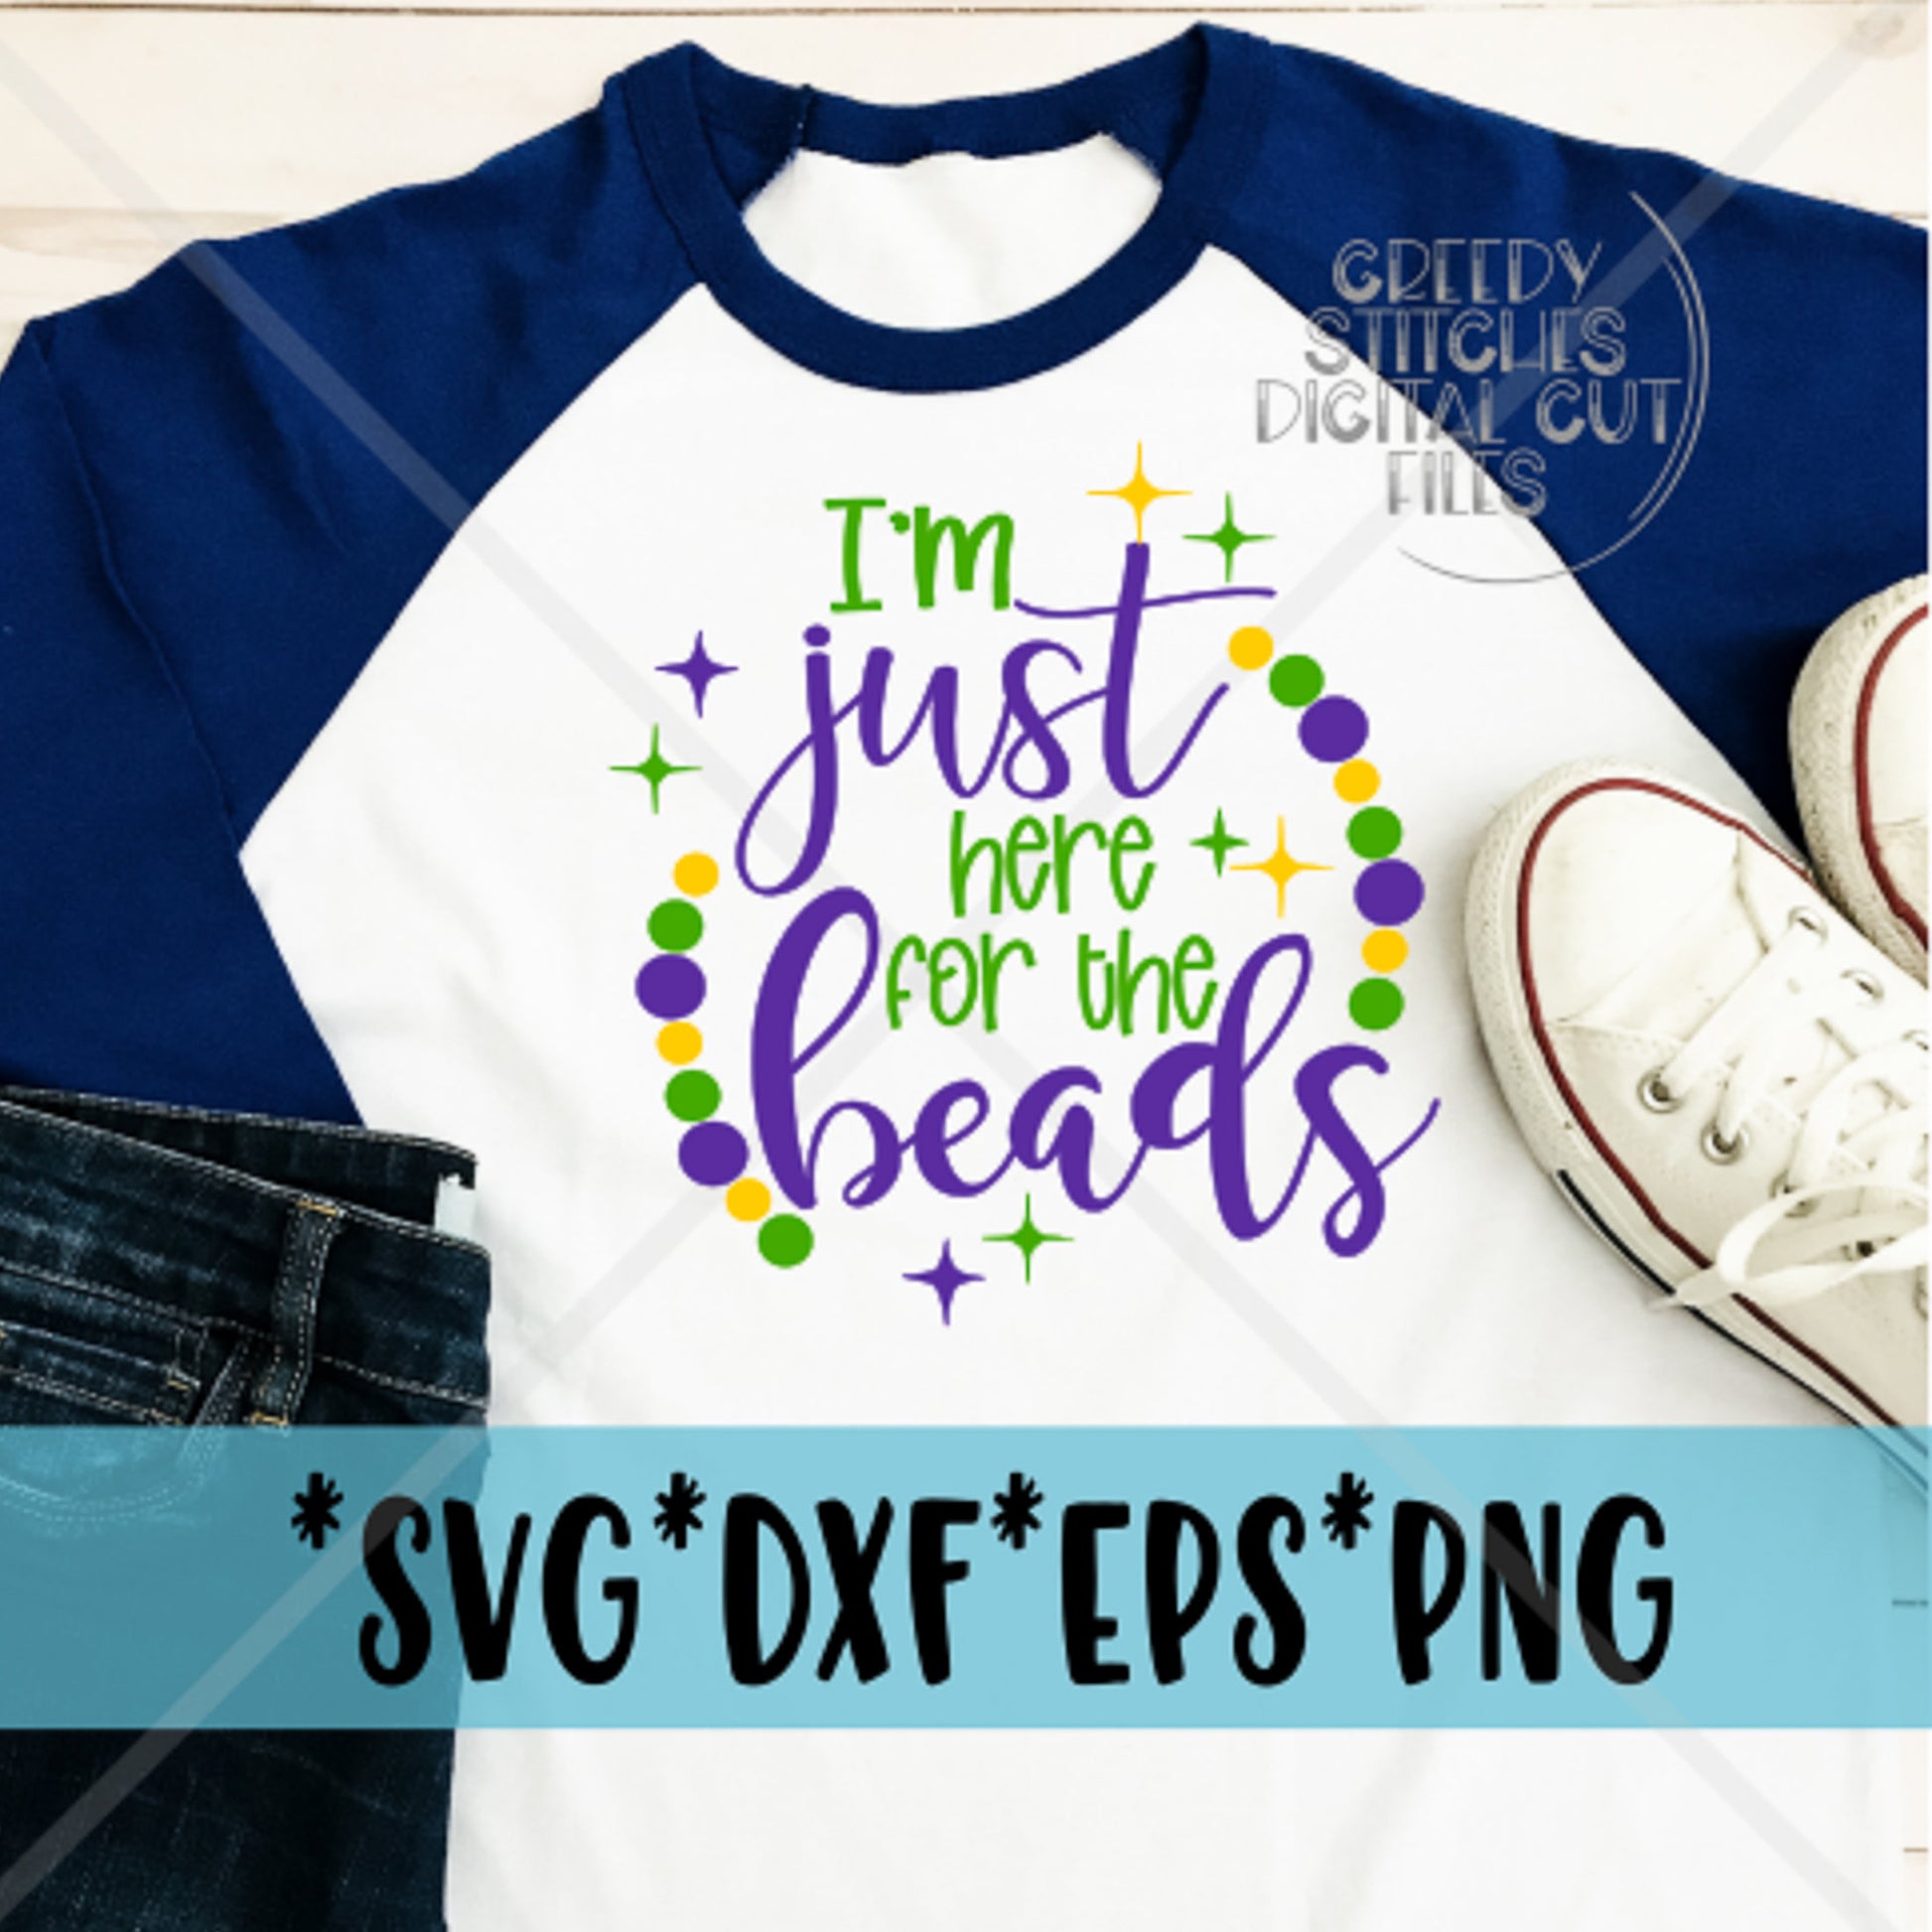 Mardi Gras SvG | I&#39;m Just Here For The Beads svg, dxf, eps, png.  Mardi Gras Beads SvG | Fat Tuesday SvG | Instant Download Cut File